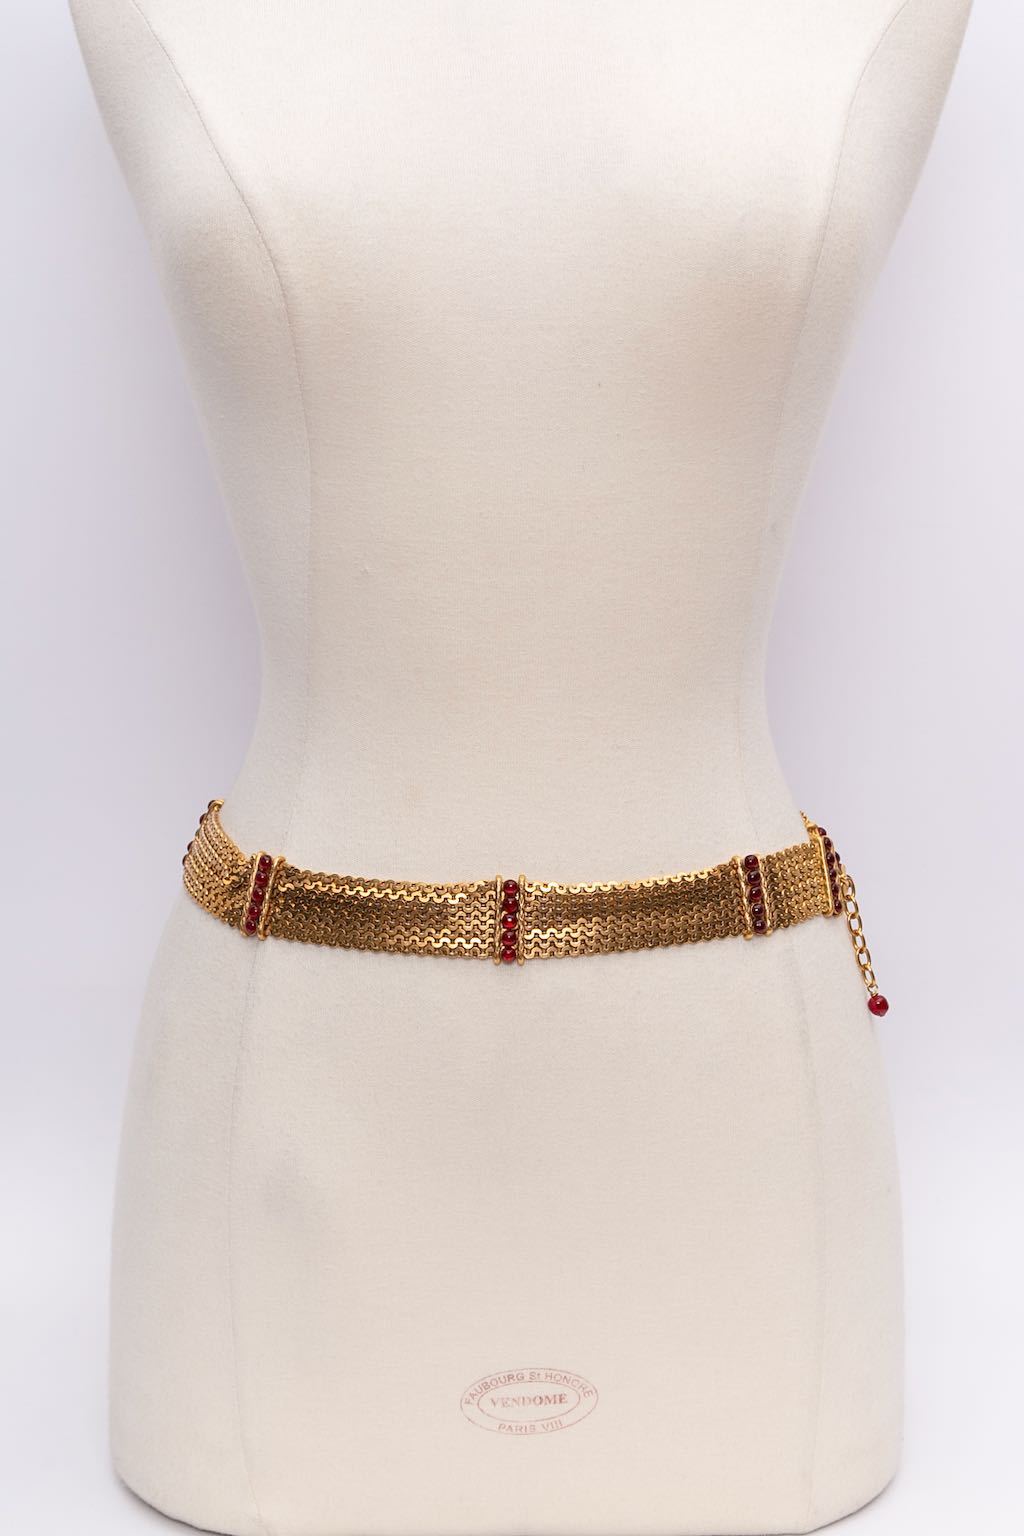 Chanel gilded metal and glass paste belt, 1996 Spring Collection